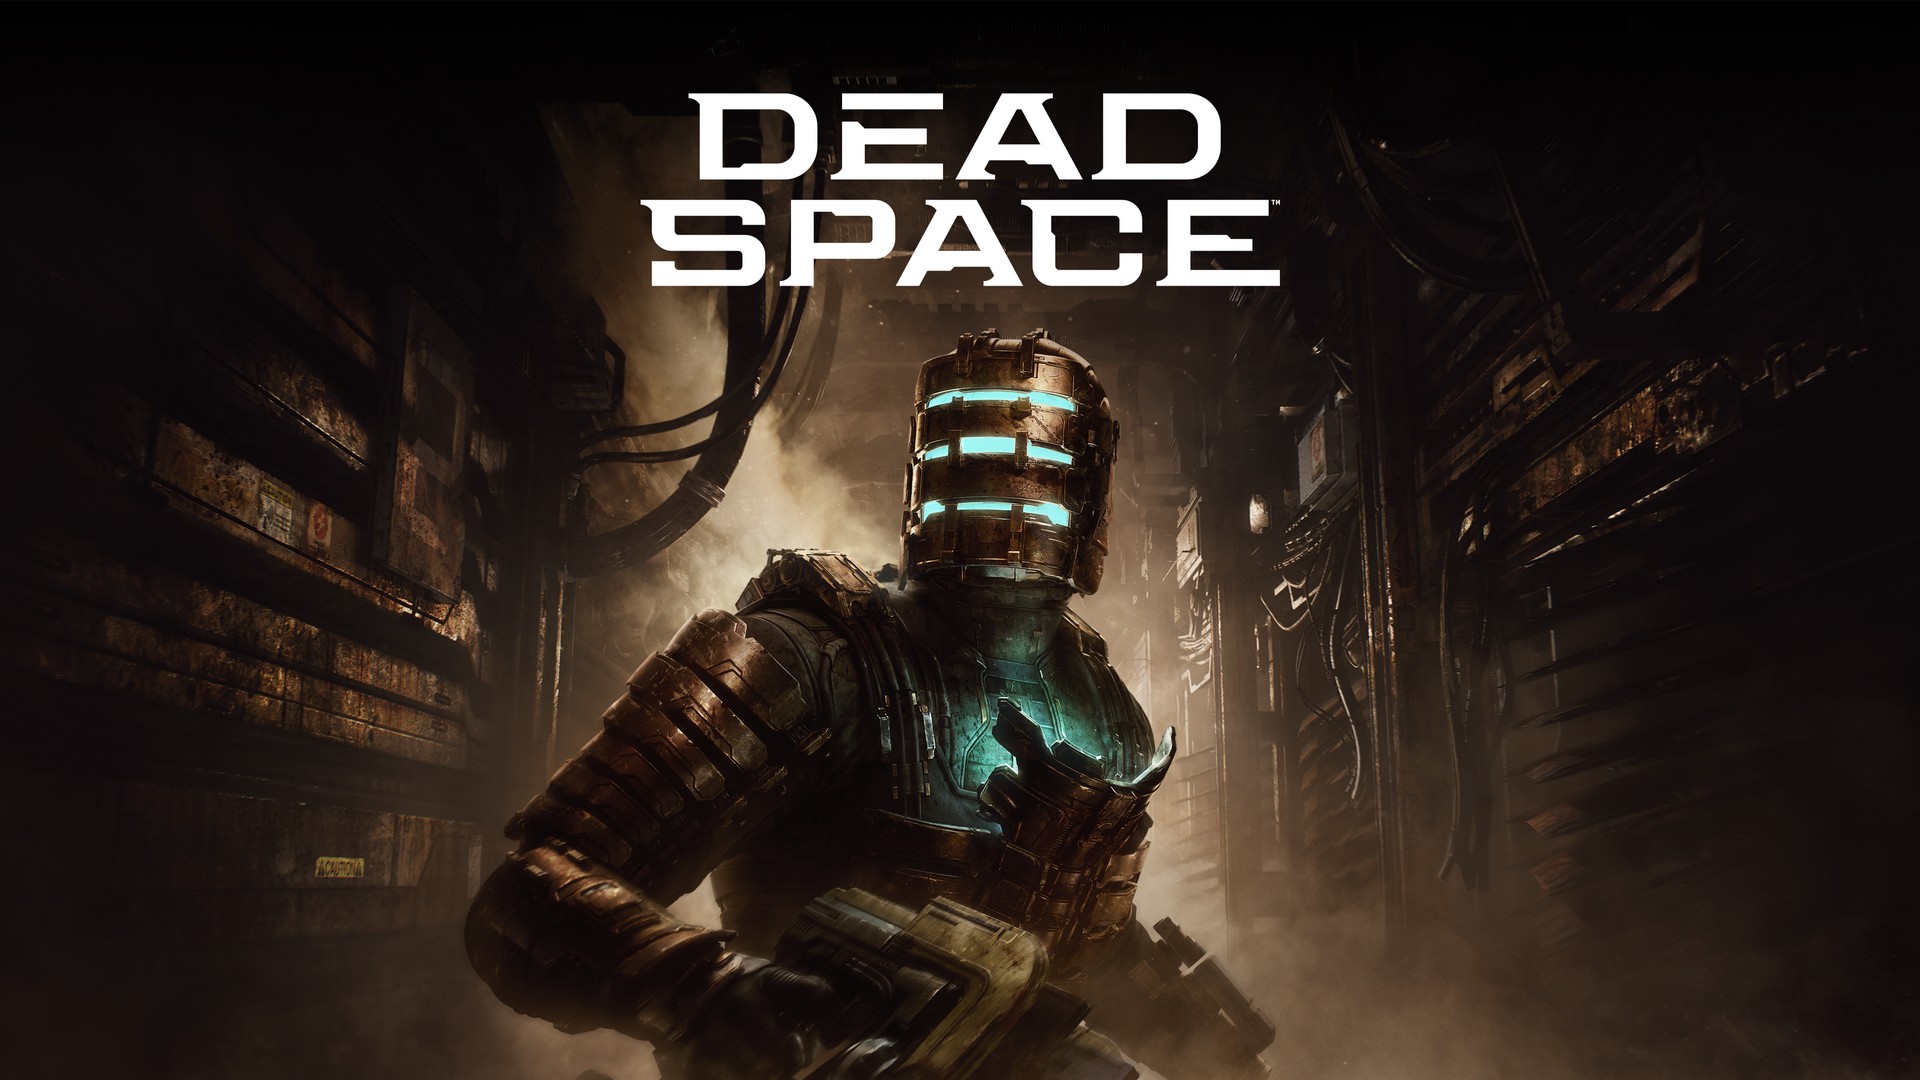 Dead Space, Remake Of The Sci-Fi Survival Horror Classic Is Now Available On Playstation 5, Xbox Series X|S & PC